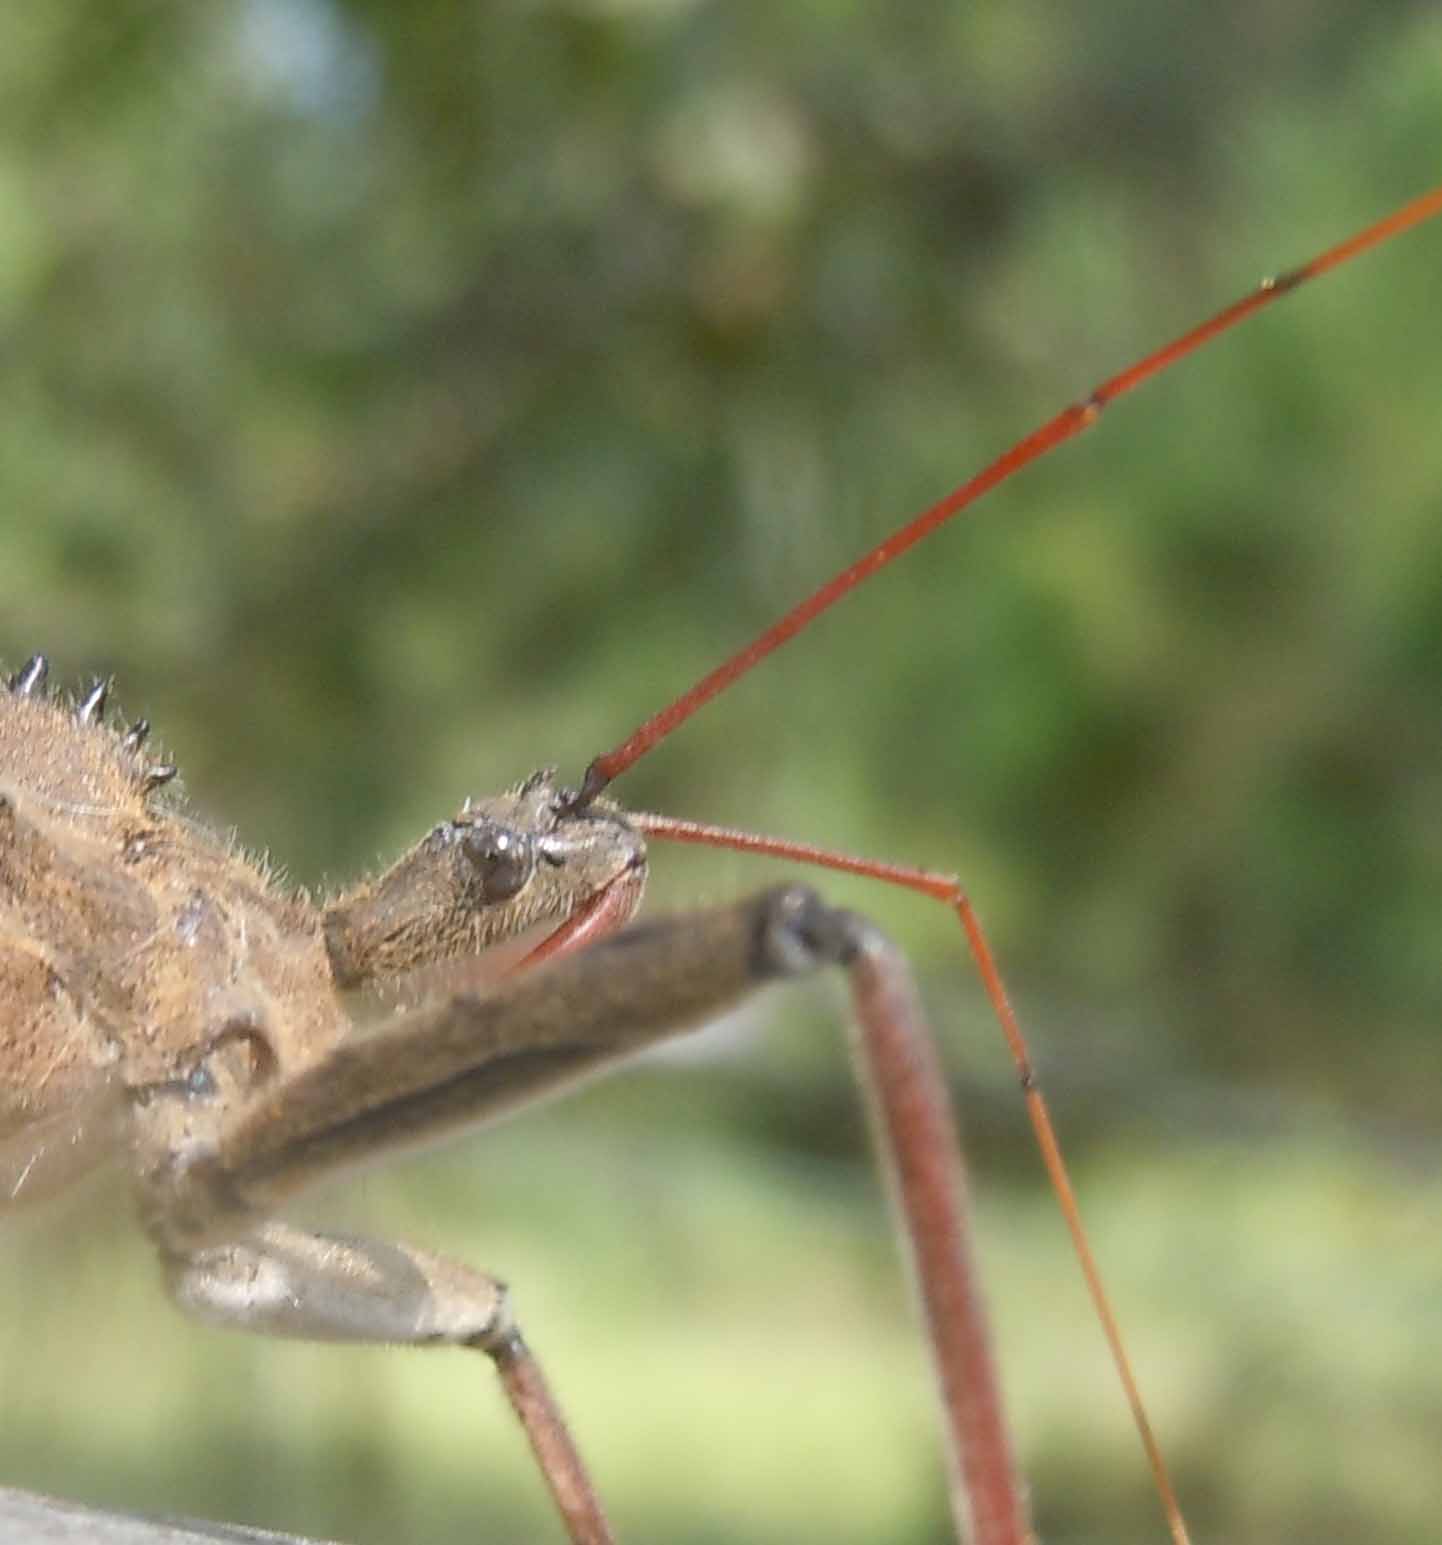 Many Georgians are confusing the common wheel bug, which is beneficial in Georgia gardens, with the kissing bug, which made news earlier this fall.